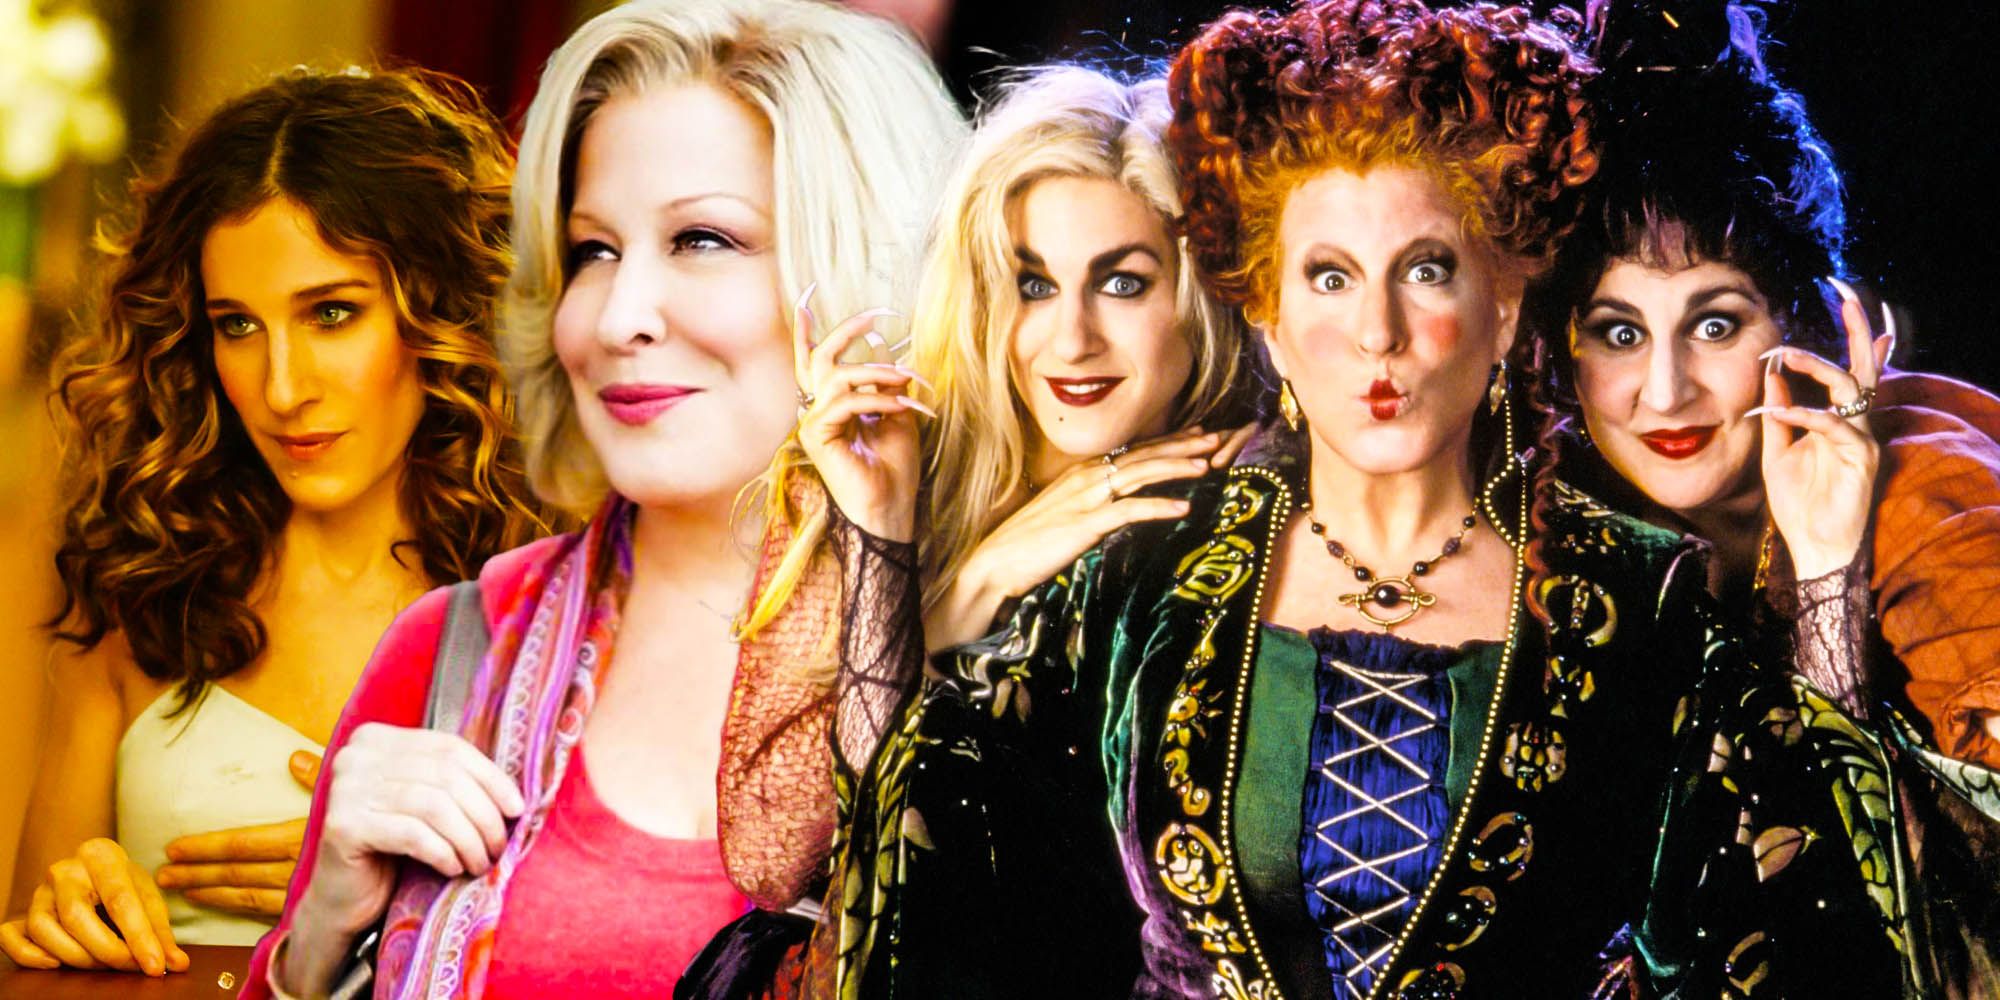 Hocus Pocus: How The Sanderson Sisters Survived Being Burned